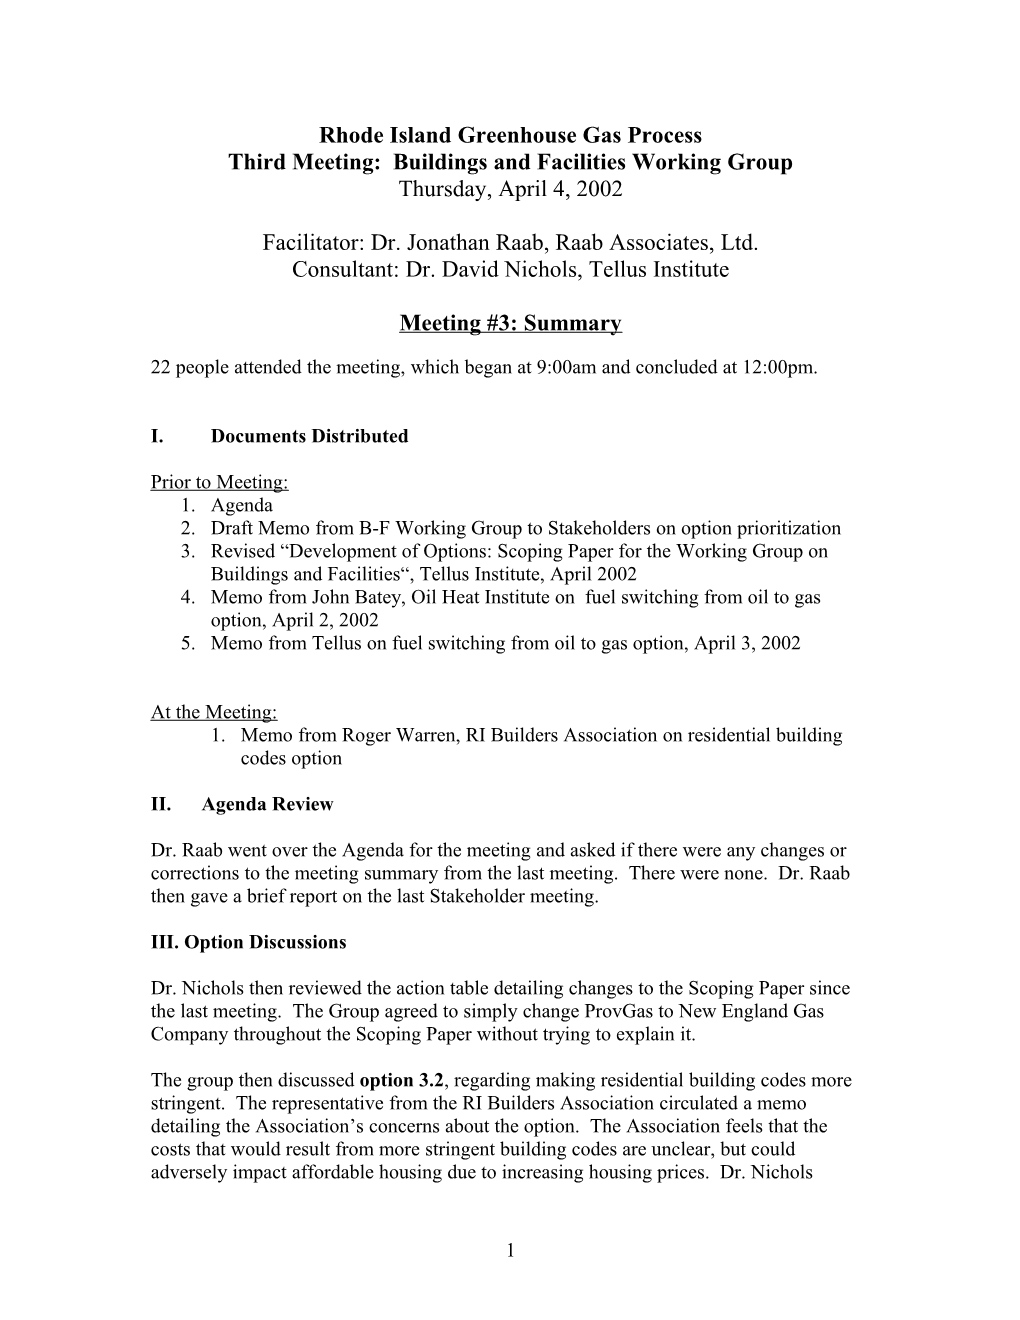 Third Meeting: Buildings and Facilities Working Group